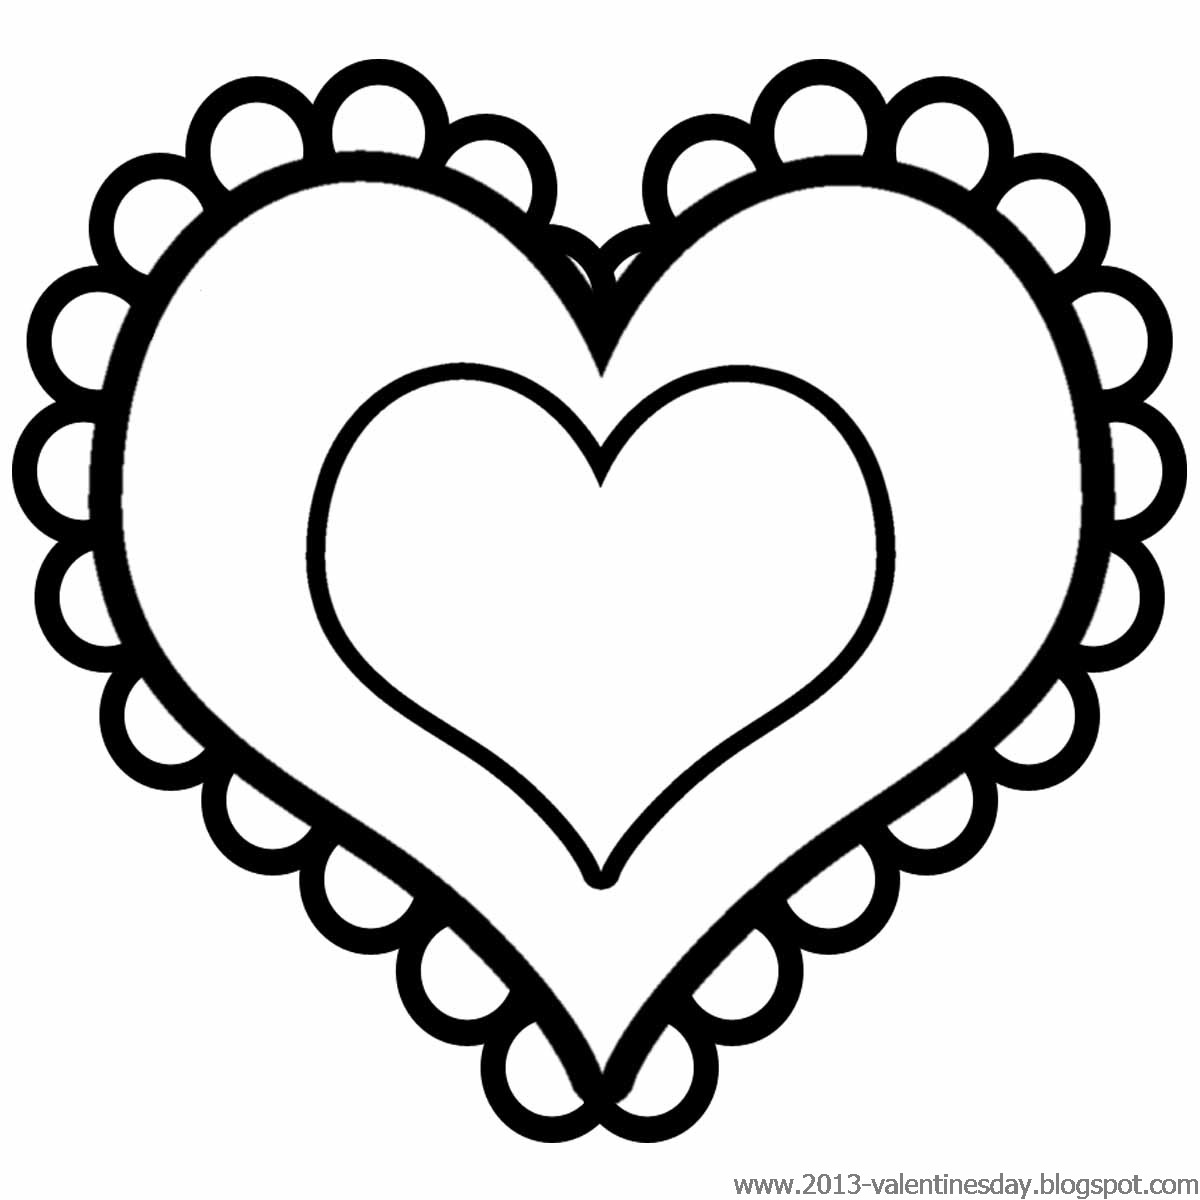 Free Small Black Heart Clipart Images   School Clipart